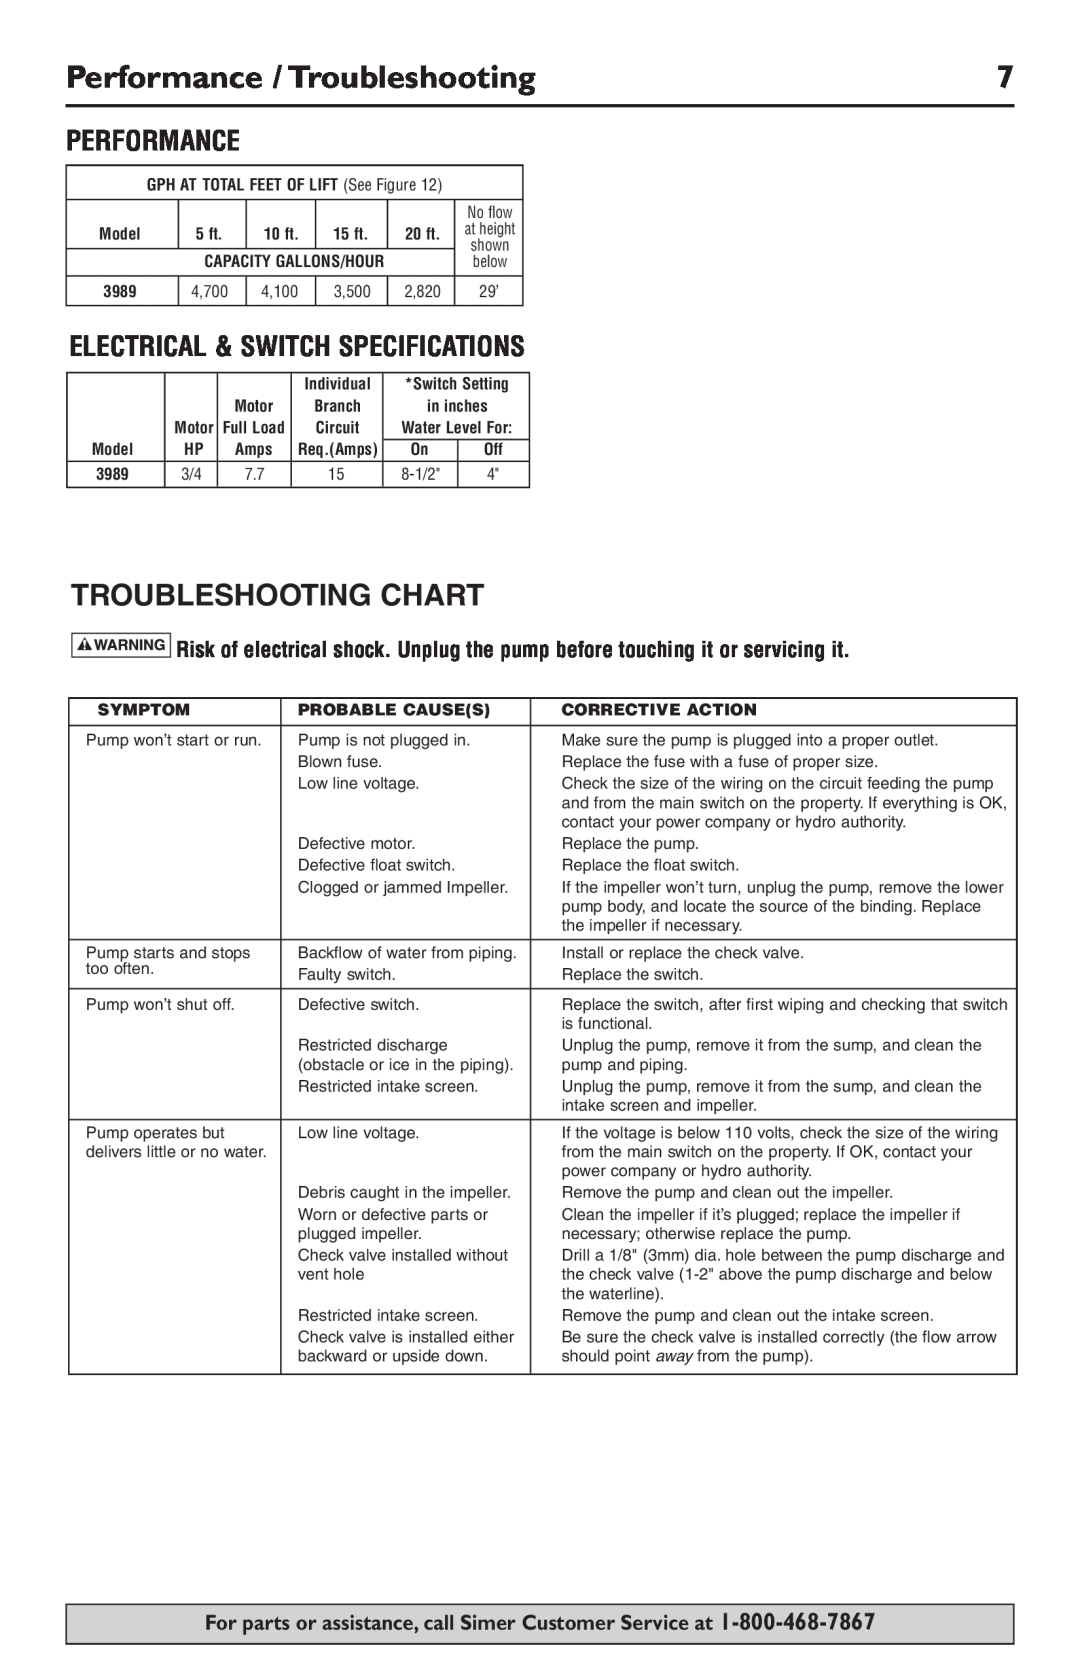 Simer Pumps 3989 owner manual Performance / Troubleshooting, Troubleshooting Chart, Electrical & Switch Specifications 